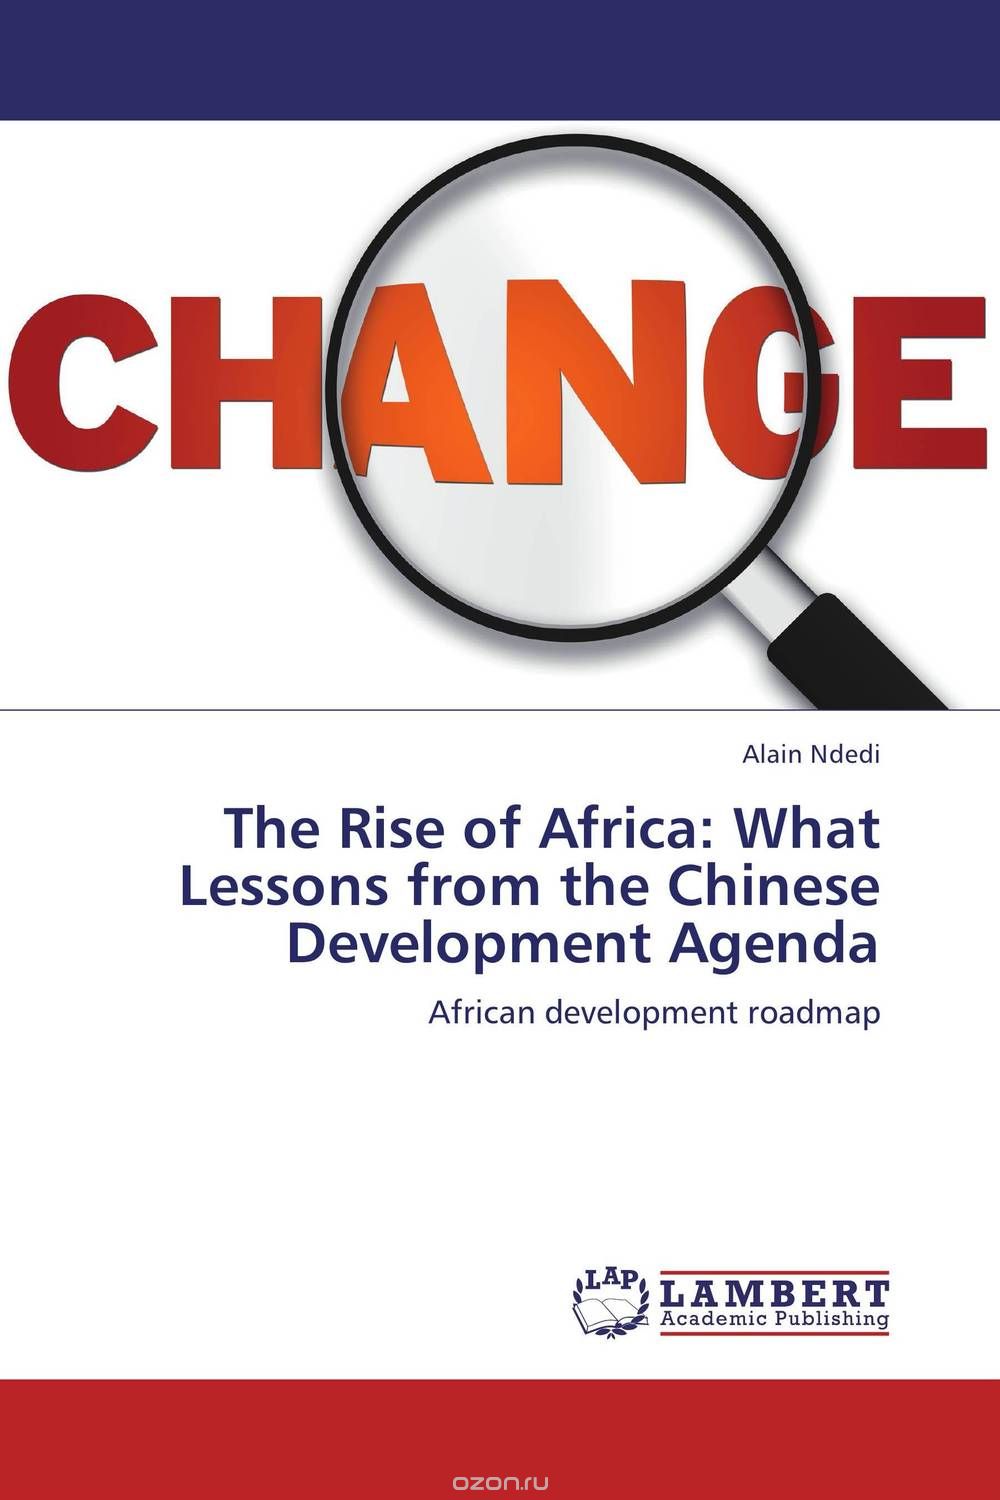 The Rise of Africa: What Lessons from the Chinese Development Agenda